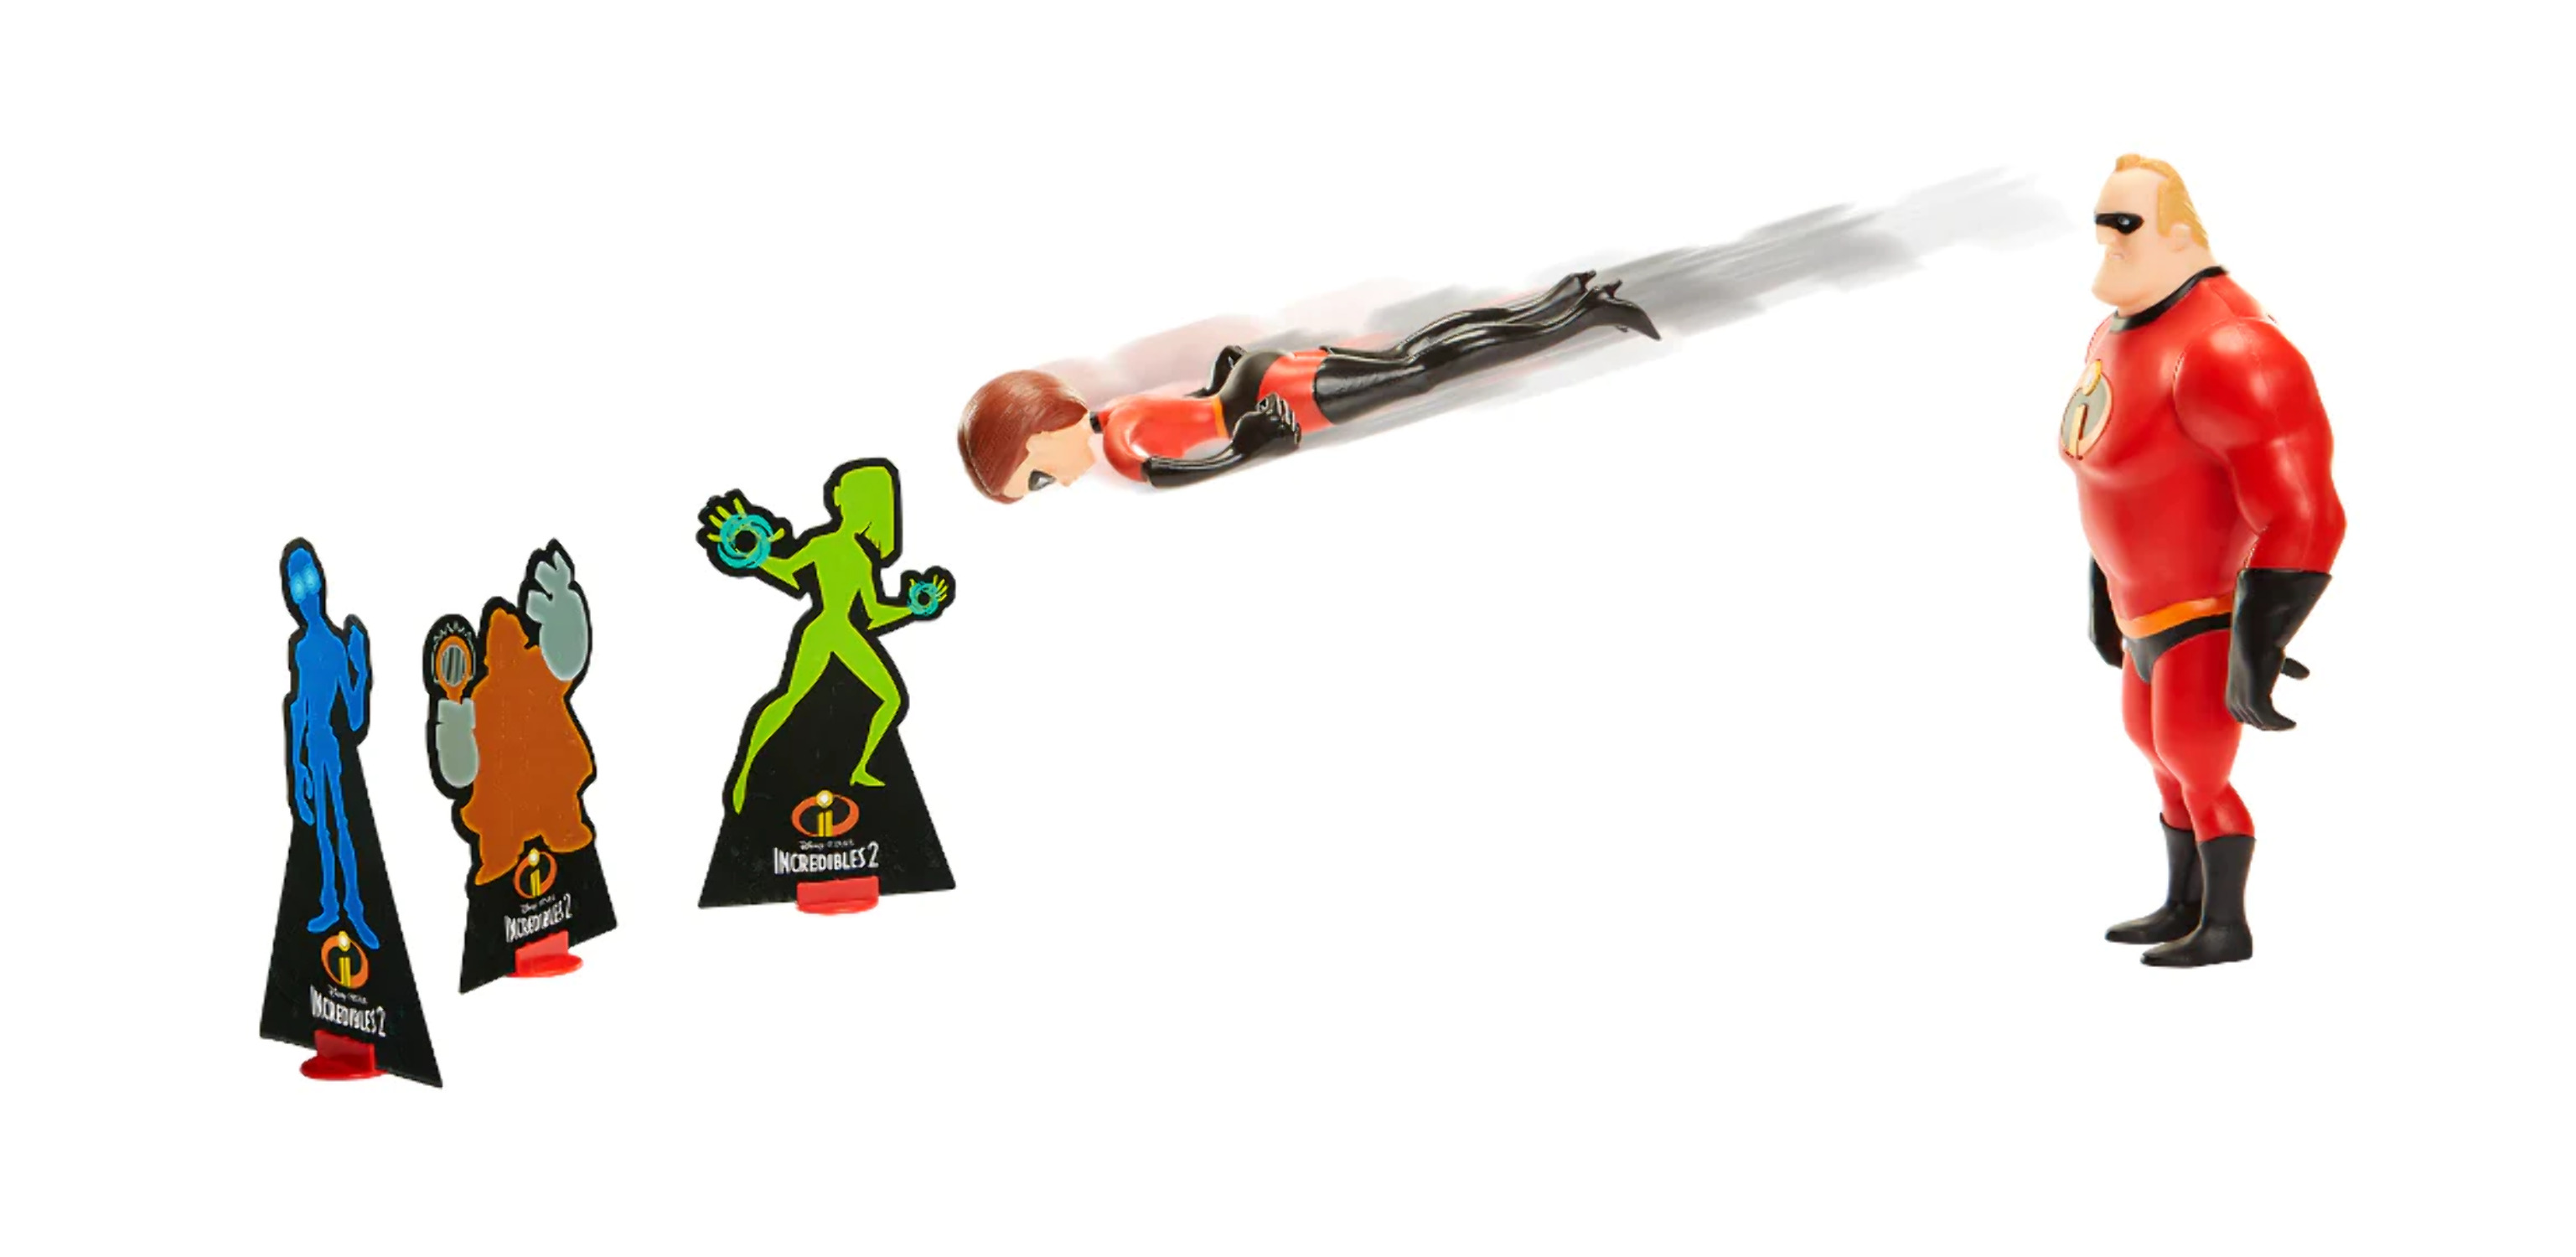 Incredibles 2 Power Couple Mr. Incredible and Elastigirl 12" Action Figures with Slingshot Feature - image 4 of 6